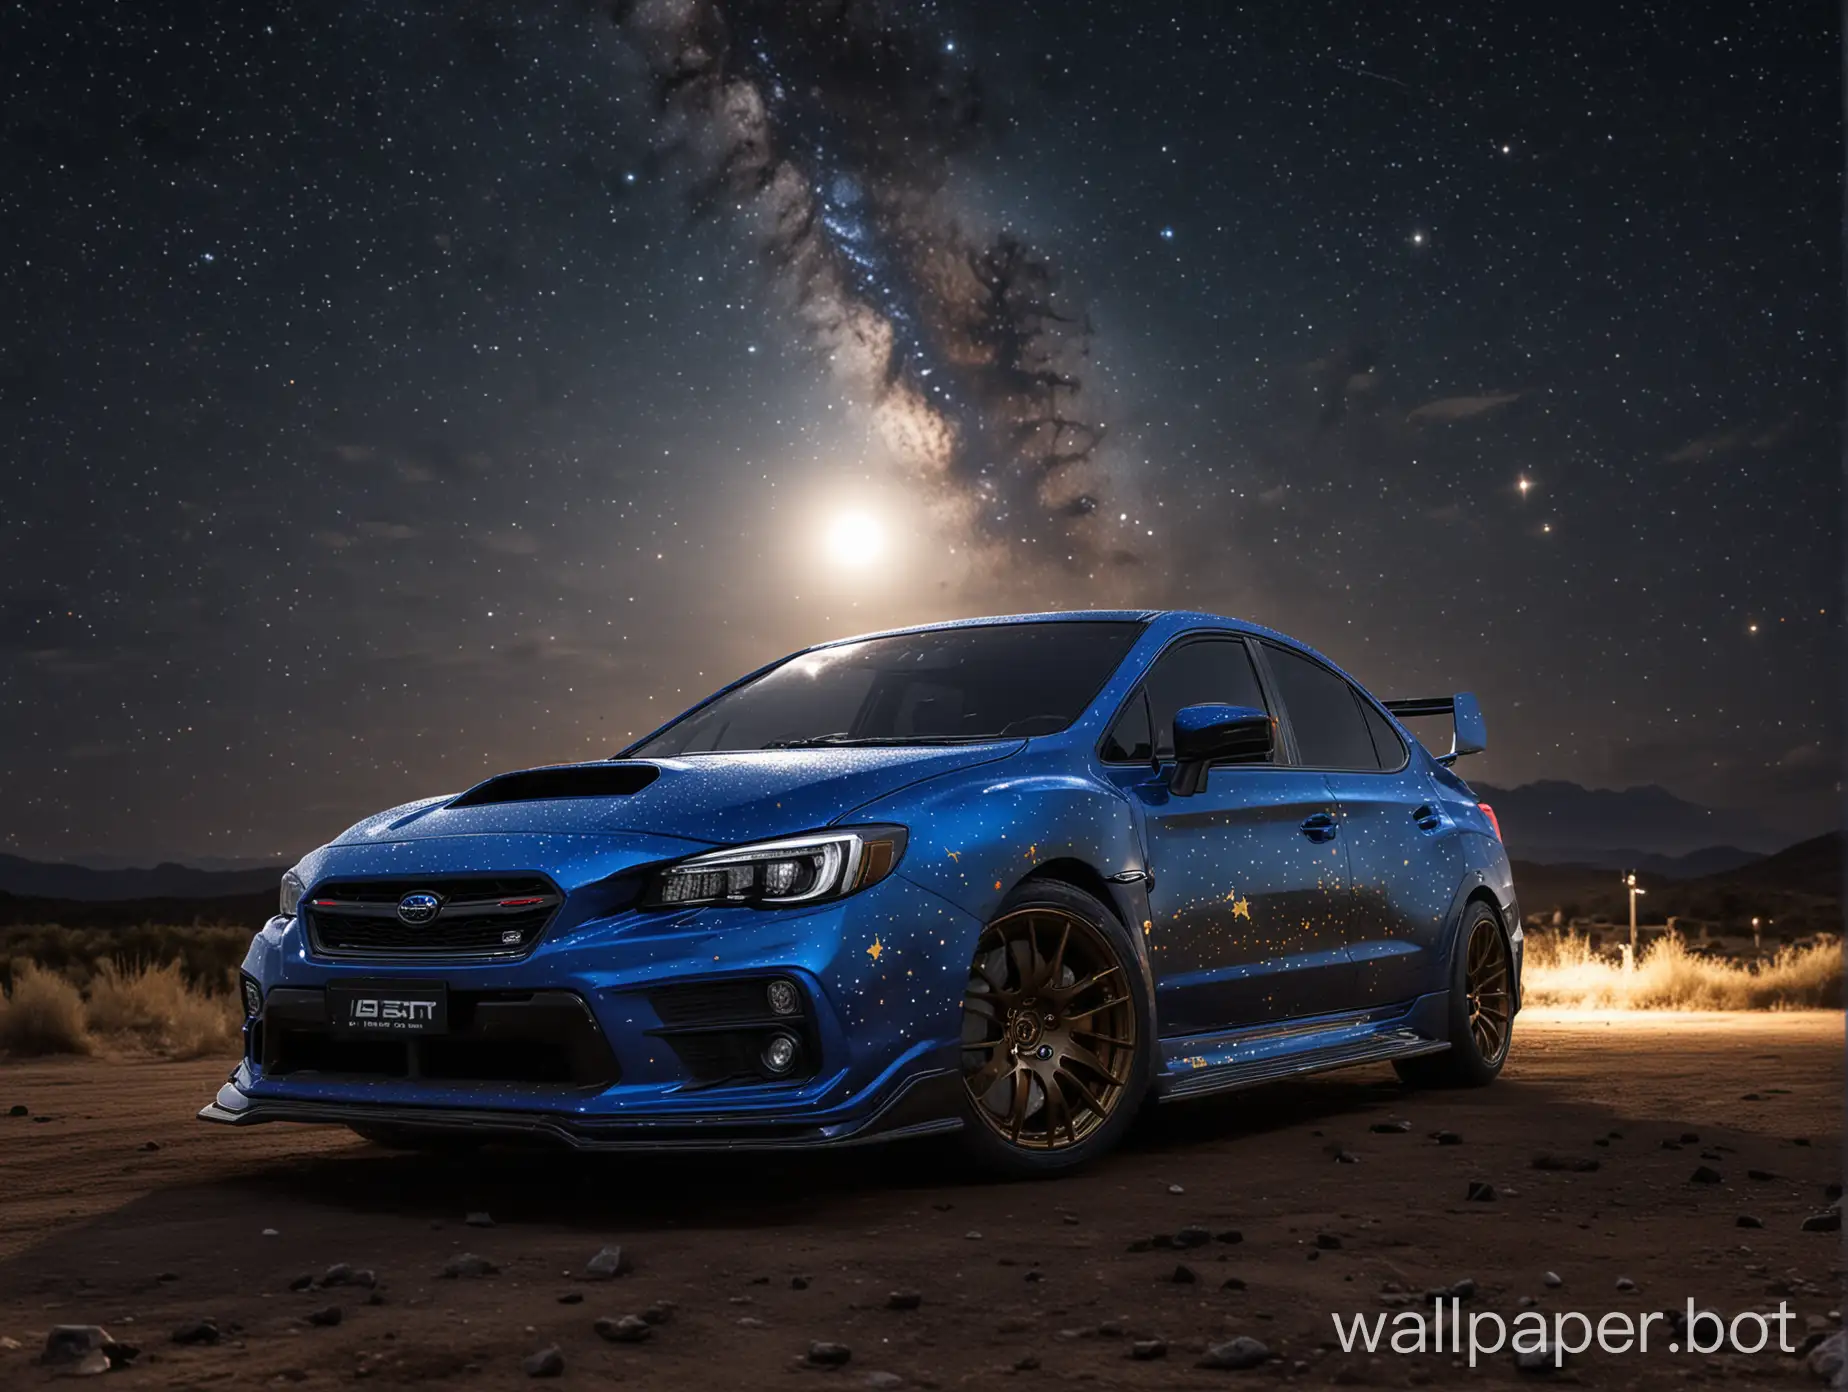 Highly-Detailed-Subaru-WRX-STI-4K-Wallpaper-with-Moonlit-Sky-and-Stars